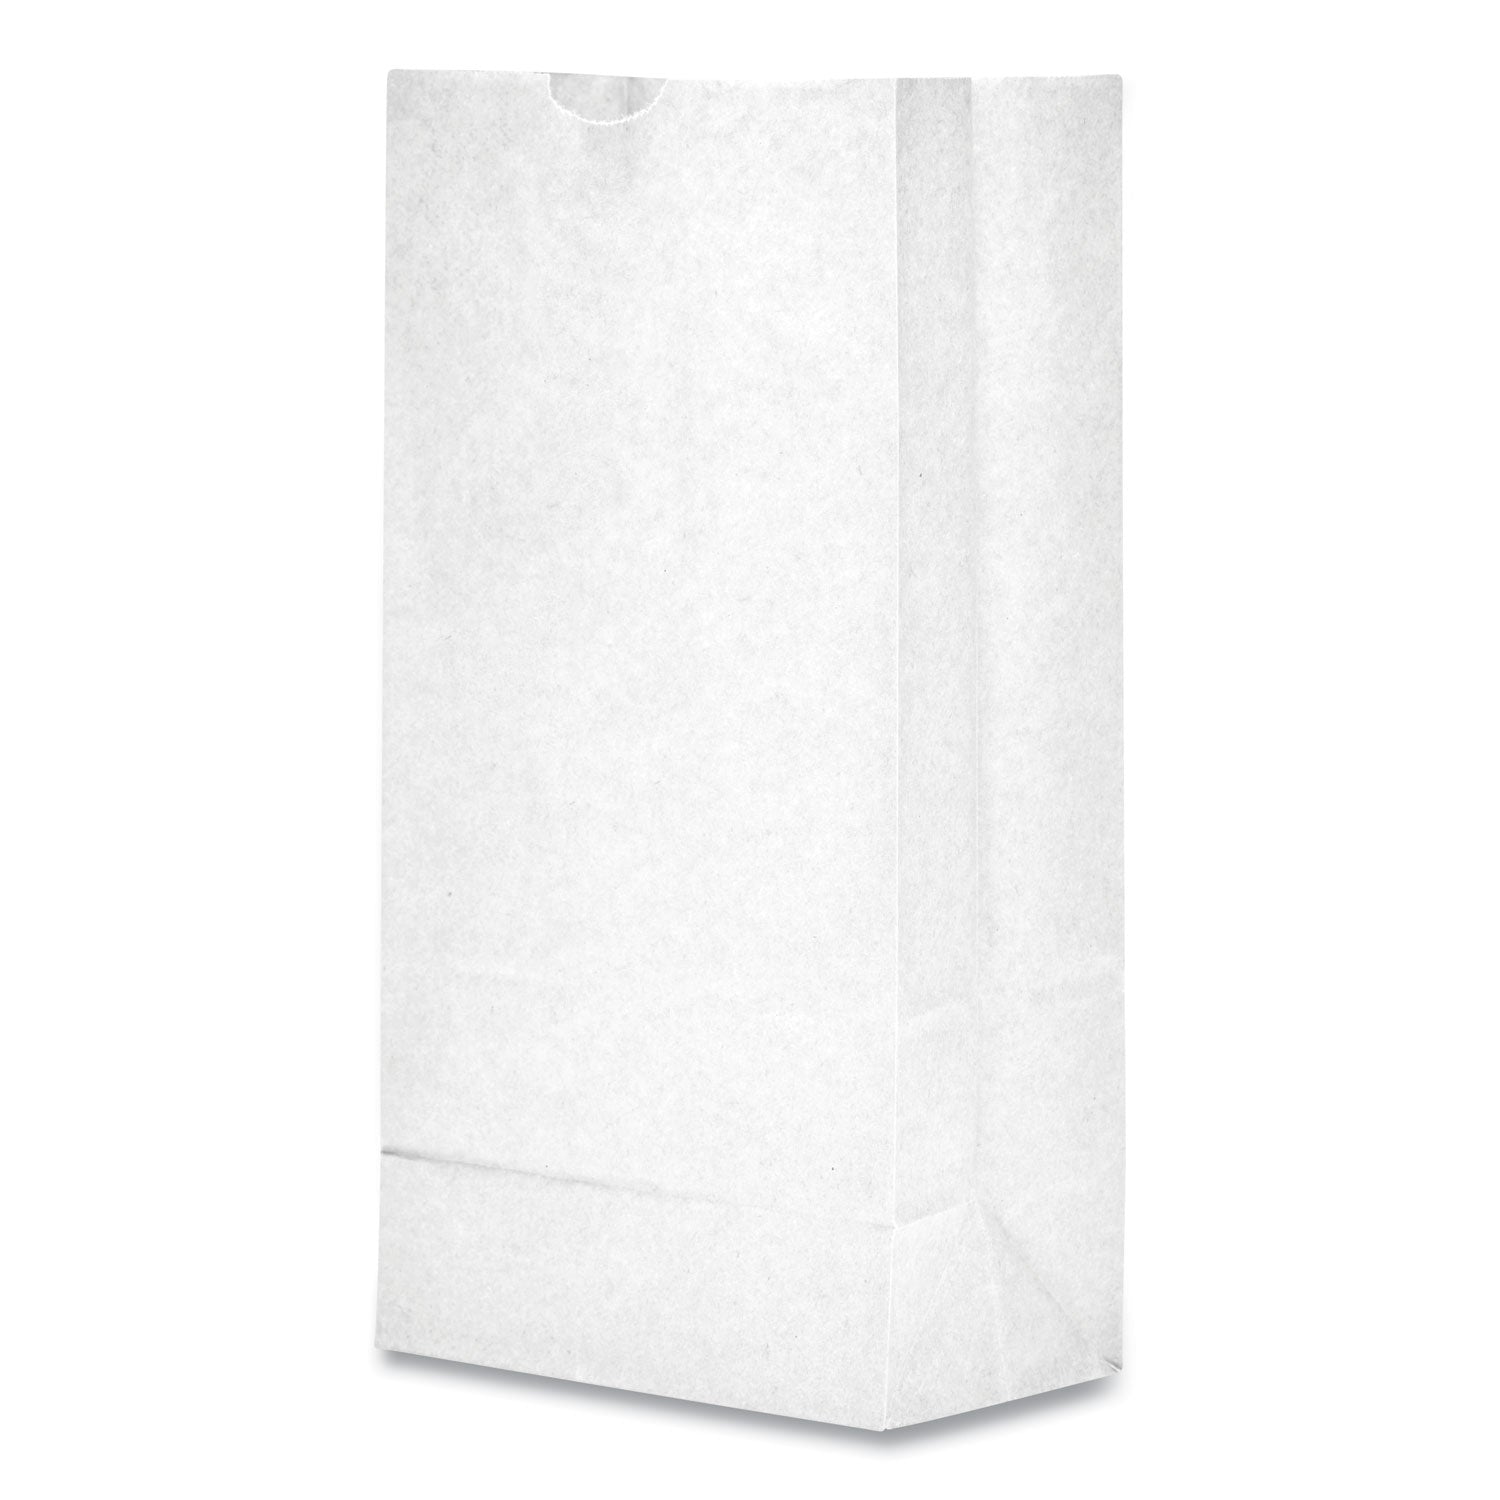 grocery-paper-bags-35-lb-capacity-#8-613-x-417-x-1244-white-500-bags_baggw8500 - 1